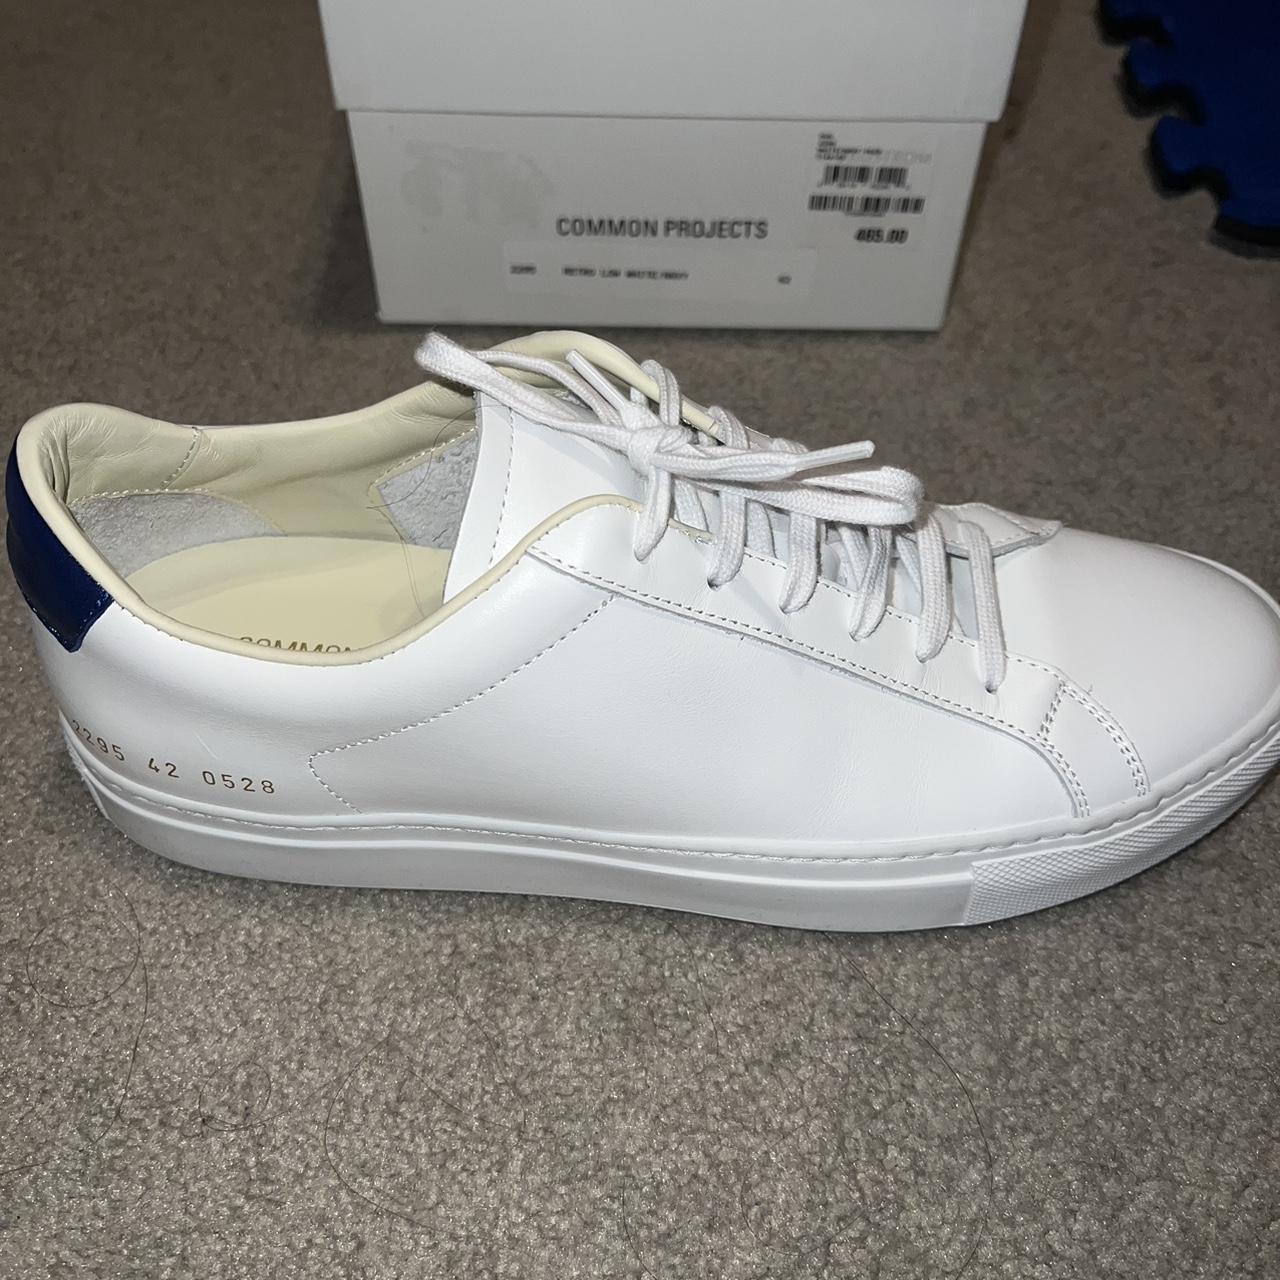 Product Image 3 - Common Projects Retro White/Navy! Retail